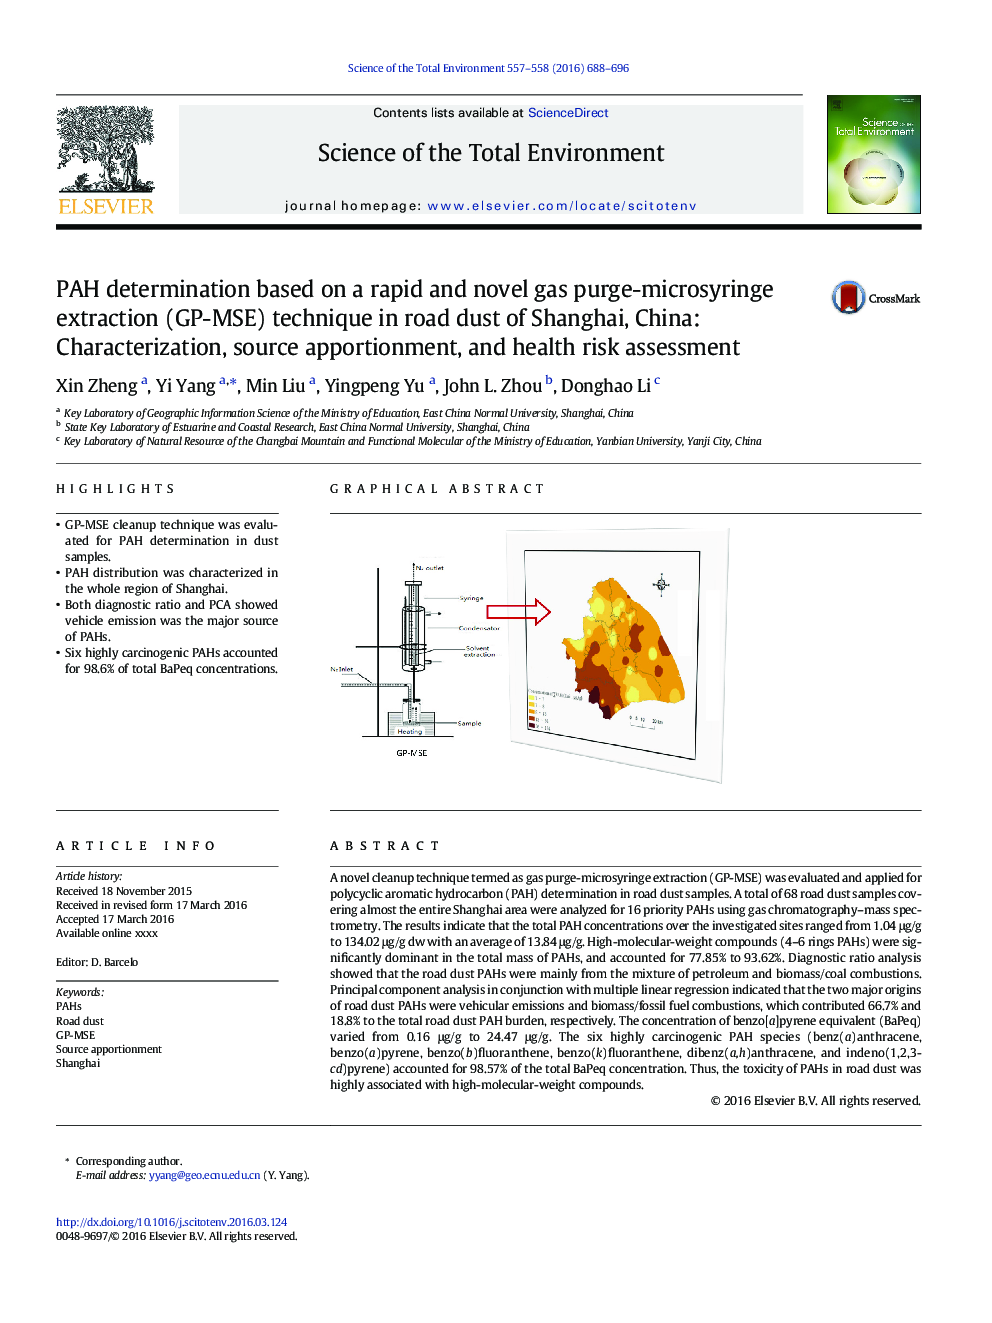 PAH determination based on a rapid and novel gas purge-microsyringe extraction (GP-MSE) technique in road dust of Shanghai, China: Characterization, source apportionment, and health risk assessment